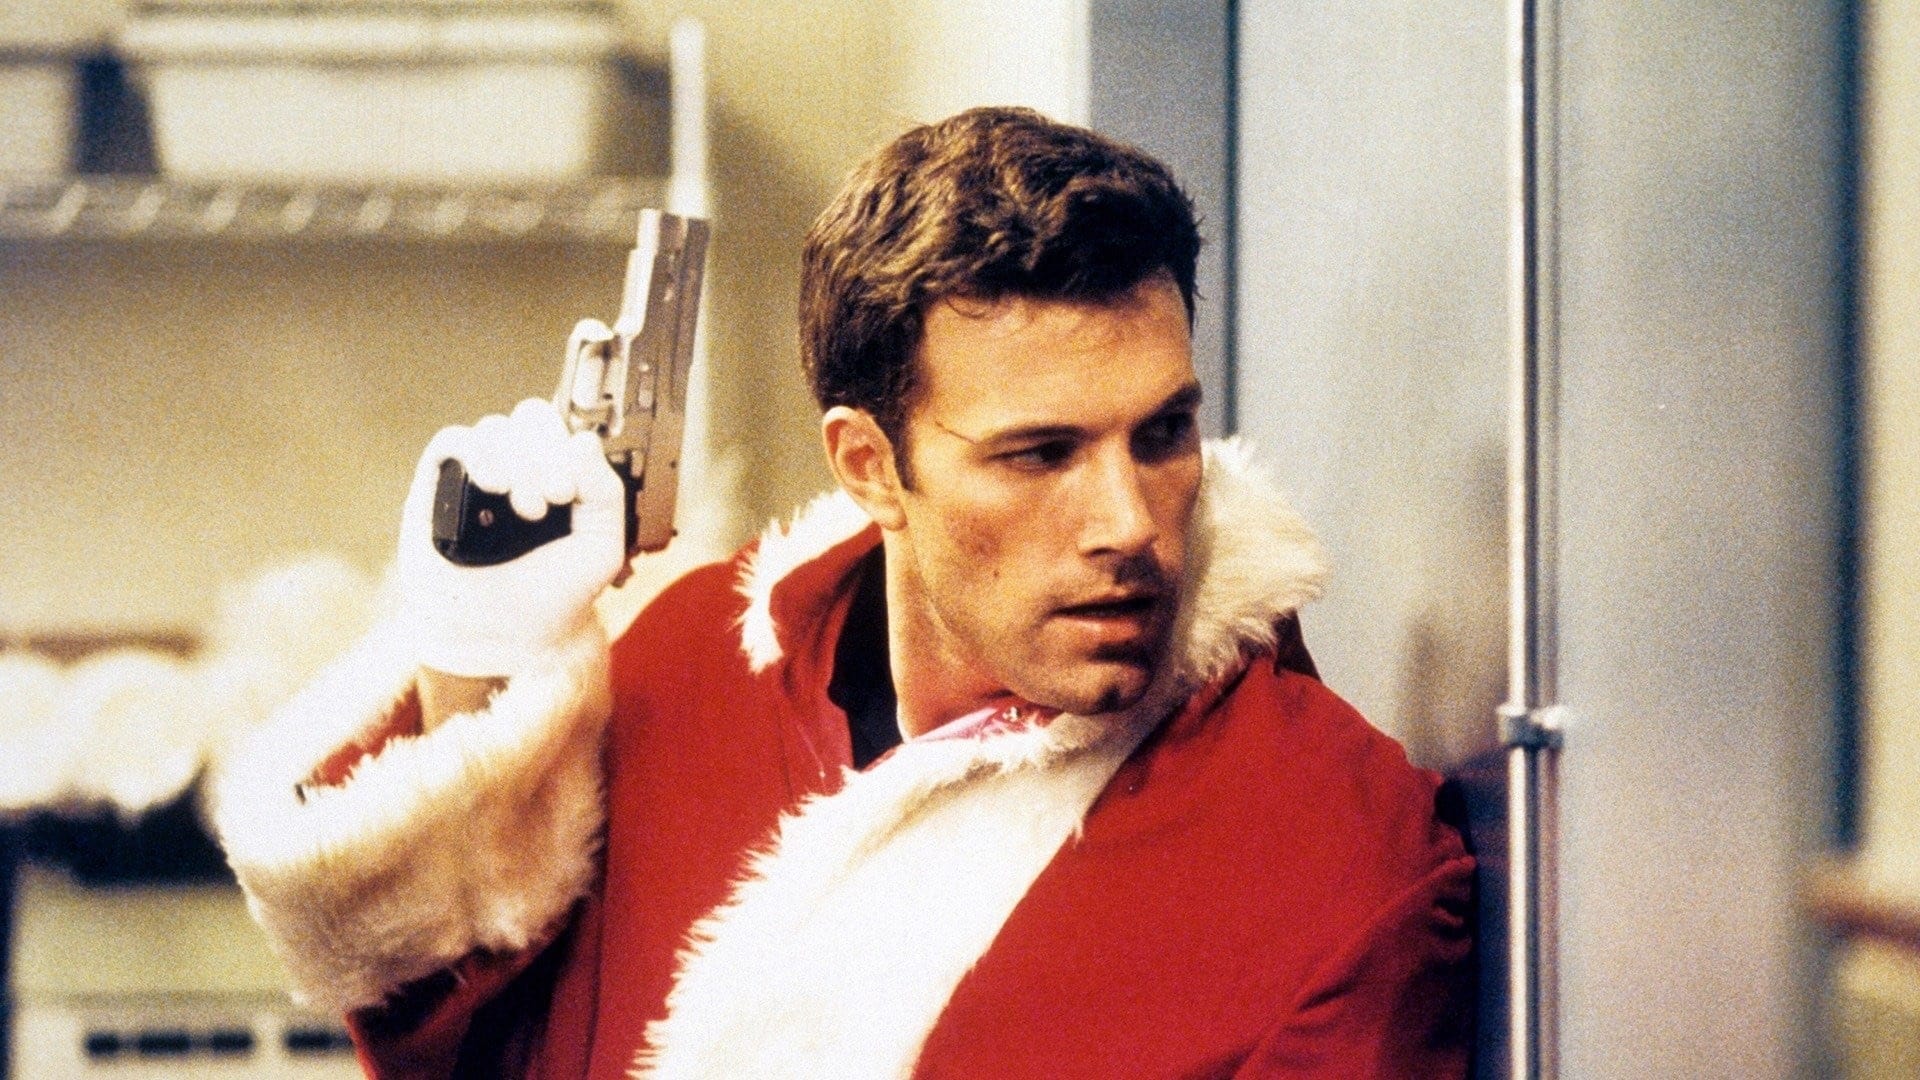 Reindeer Games 2000 Soap2Day